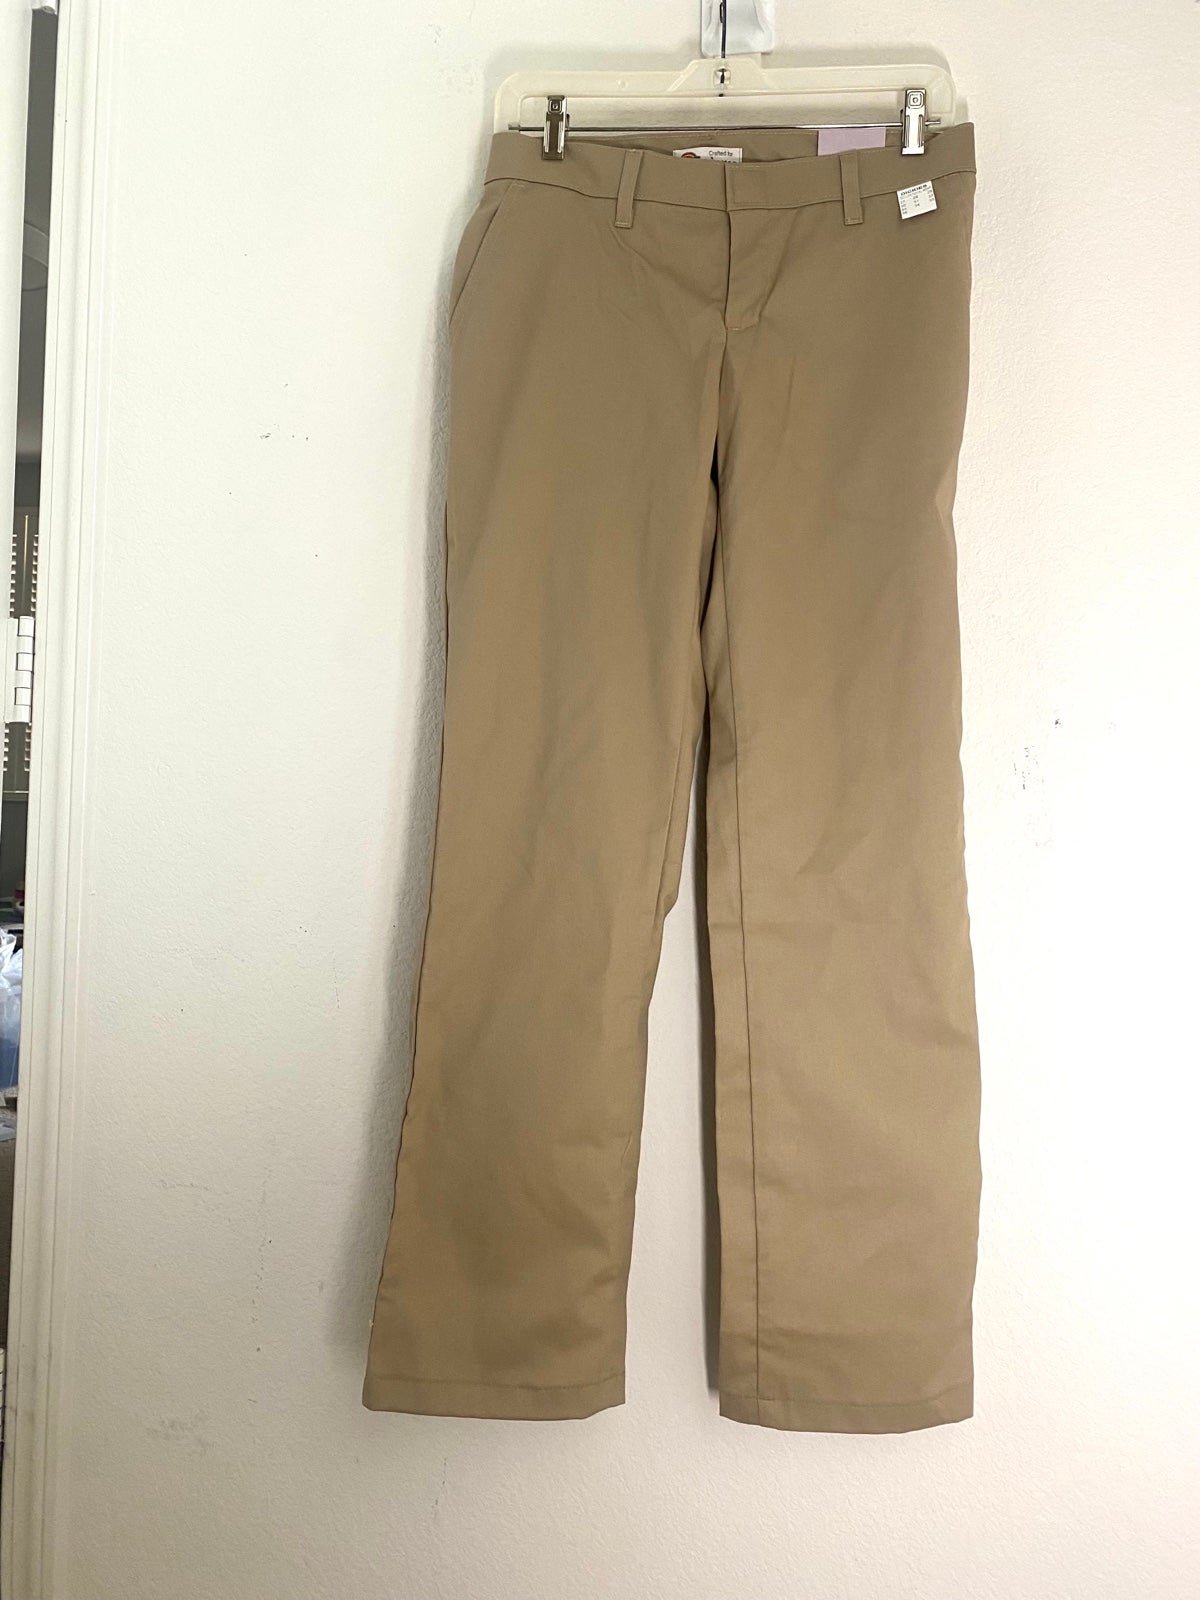 Great Women´s FLEX Relaxed Fit Pants size 2 MbIJVYiOj Buying Cheap